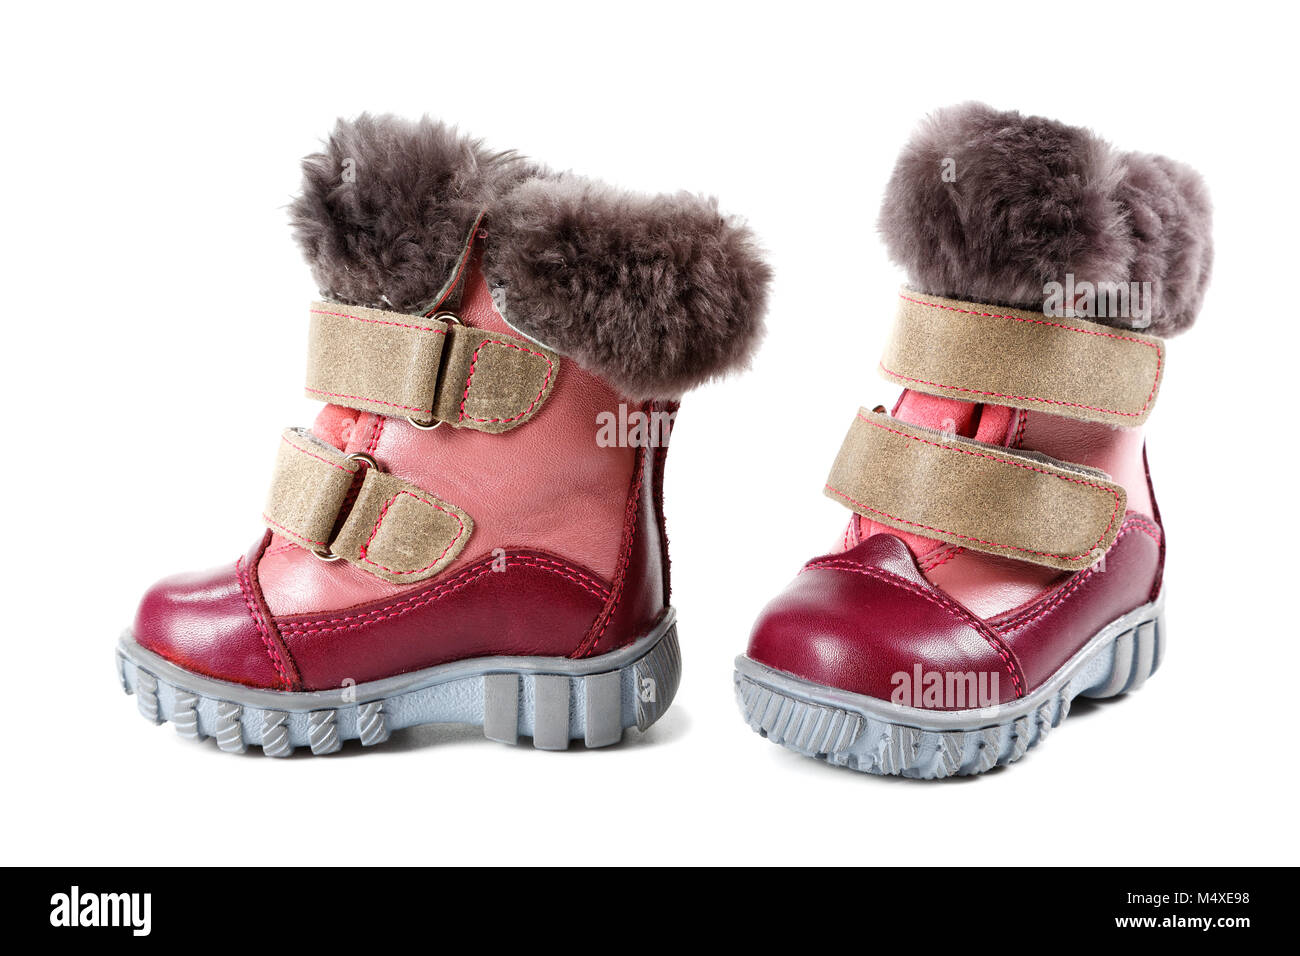 Children's winter boots isolated on white background Stock Photo